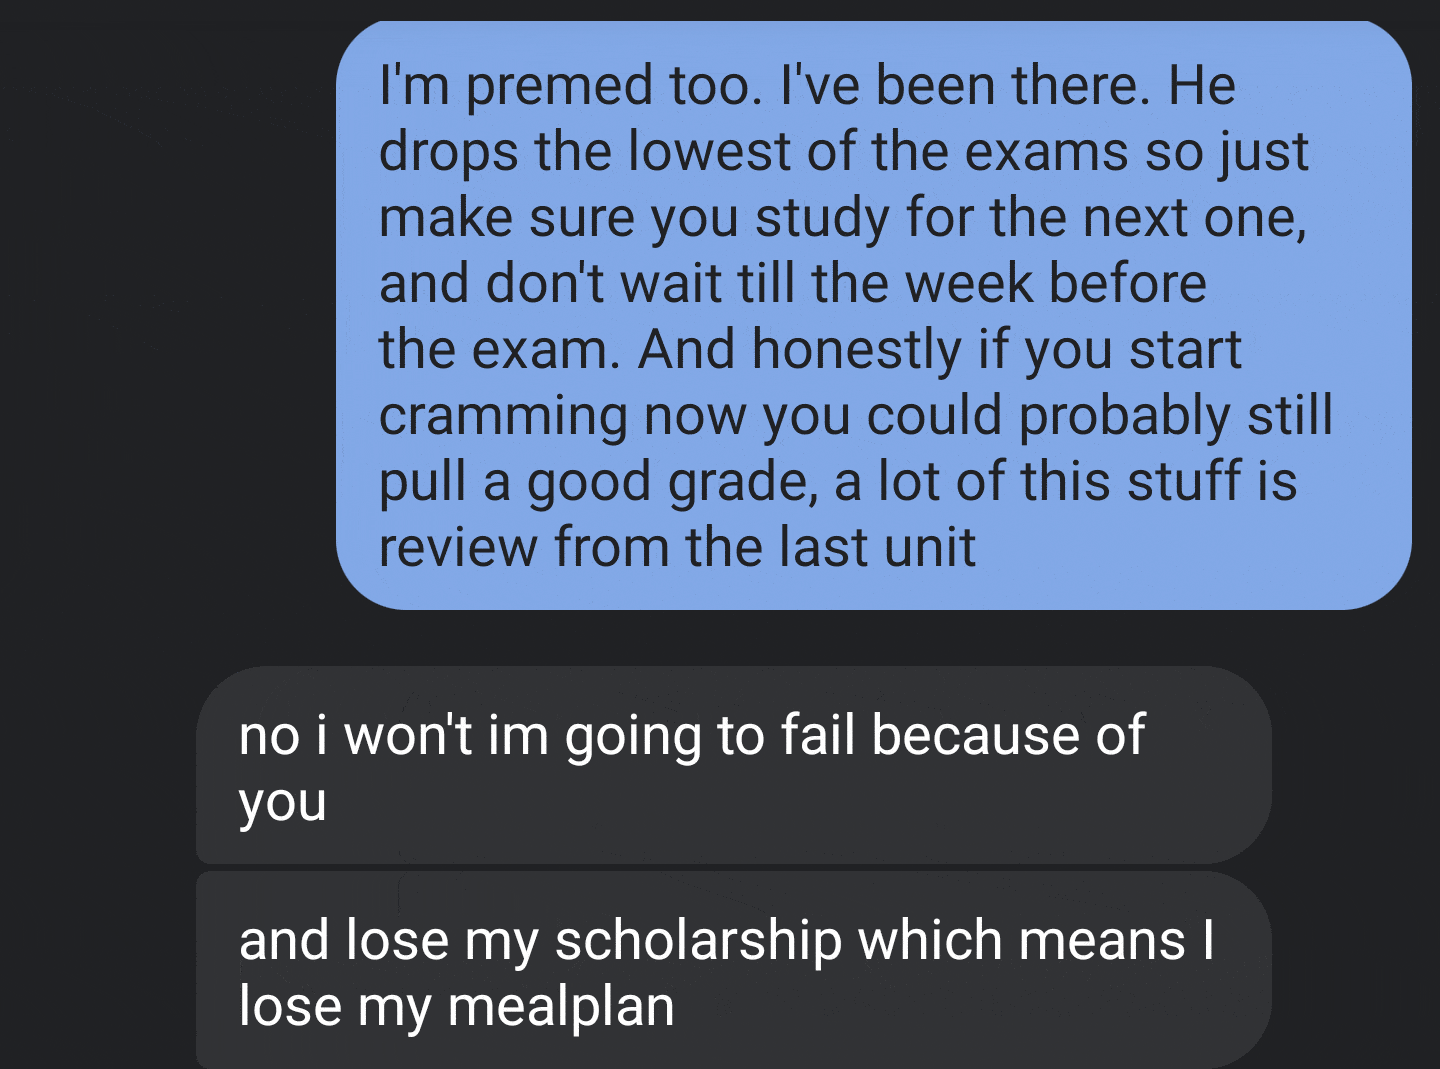 angle - I'm premed too. I've been there. He drops the lowest of the exams so just make sure you study for the next one, and don't wait till the week before the exam. And honestly if you start cramming now you could probably still pull a good grade, a lot 